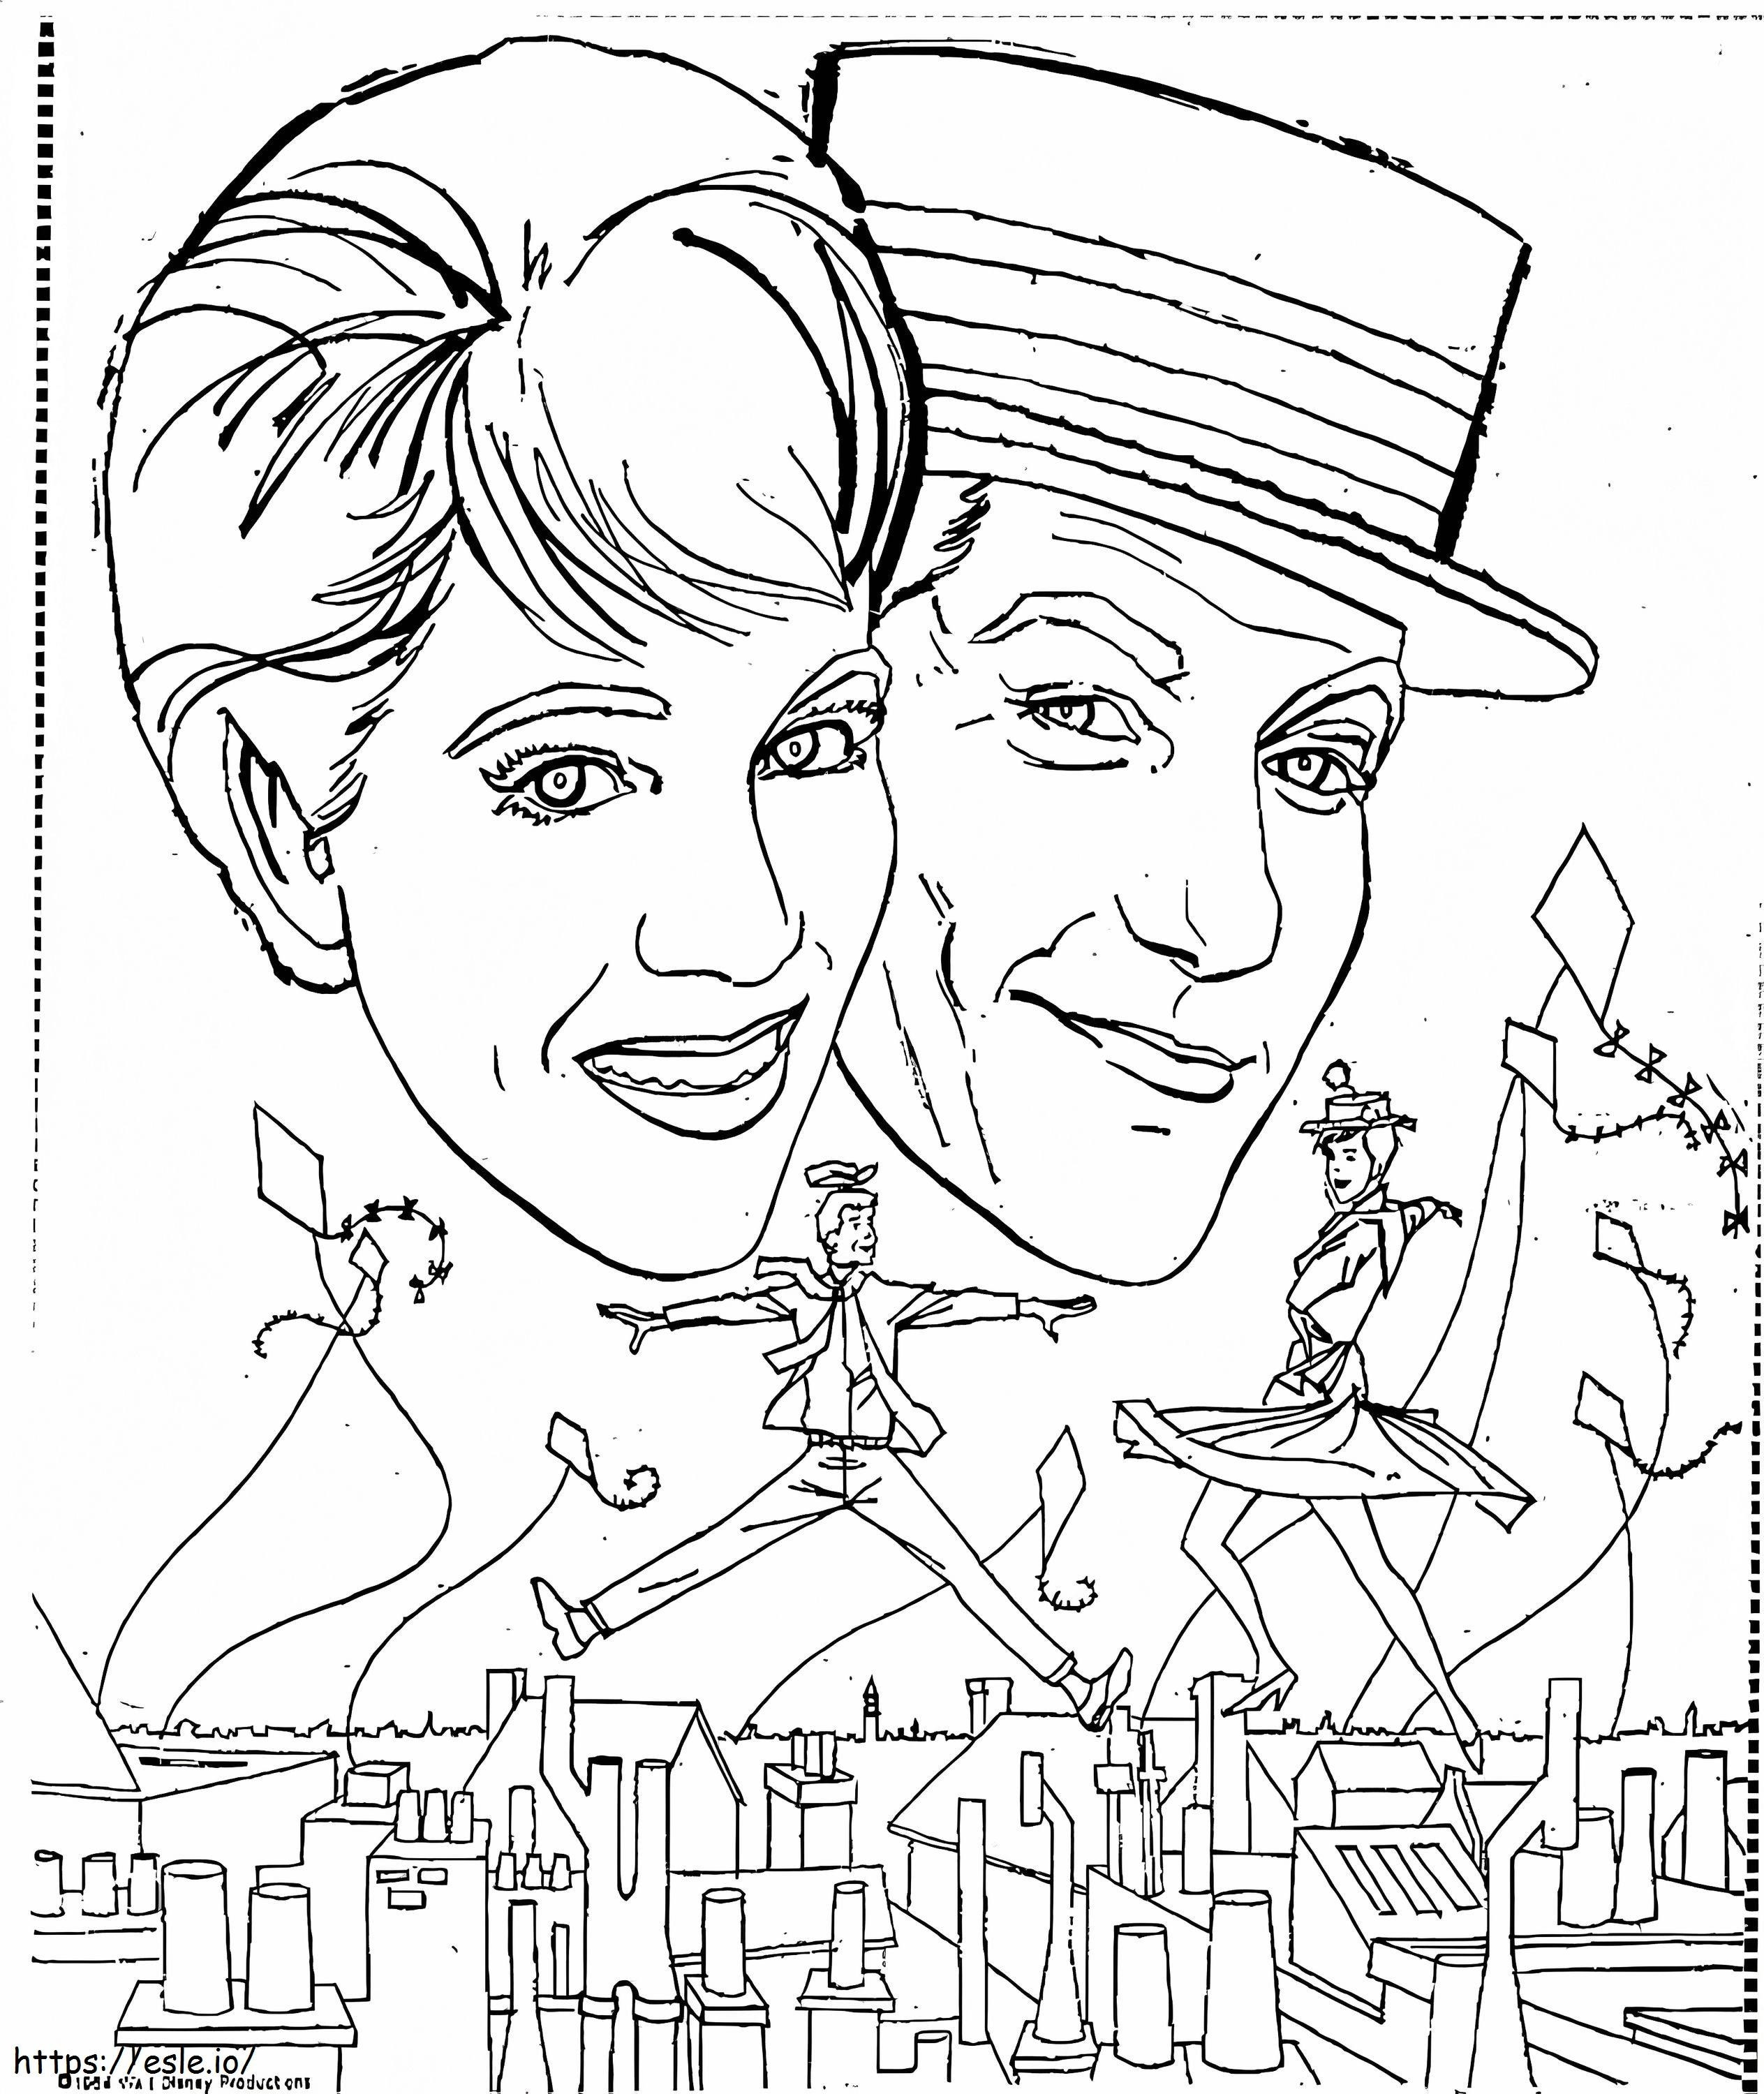 Mary Poppins 5 coloring page